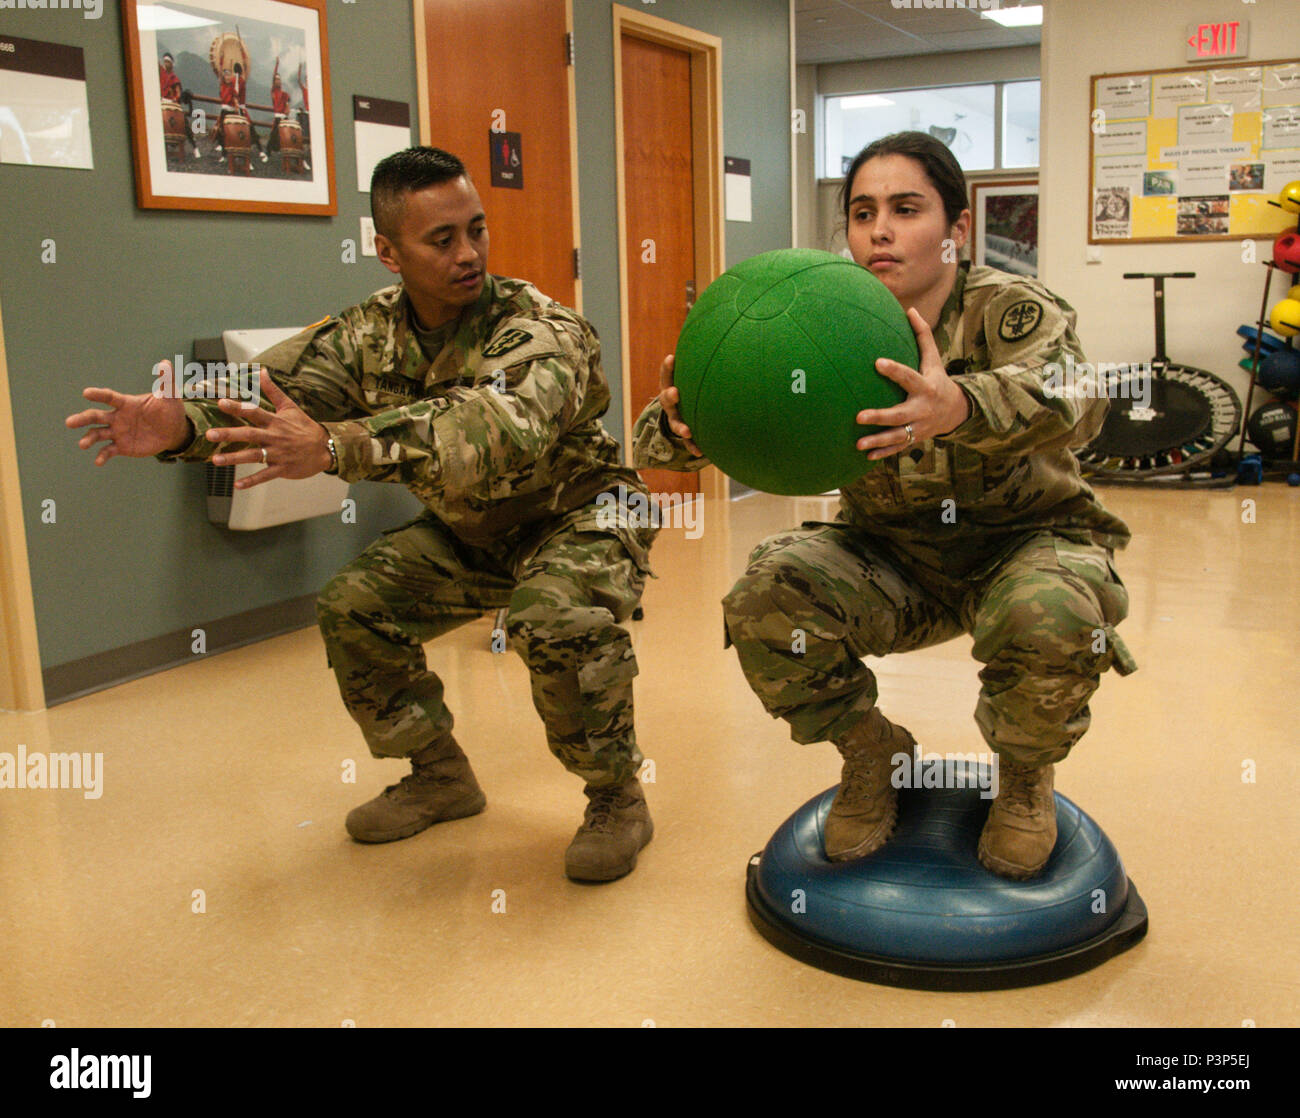 U.S. Army Capt. Allan B. Tangaan, a Davis, California, native serving as a physical therapist with the 328th Combat Support Hospital, coaches a patient on how to properly perform a stability ball exercise during a physical therapy session conducted at the Brigadier General Crawford F. Sams U.S. Army Health Clinic in Camp Zama, Japan, July 12, 2016. Tangaan and seven other Army Reserve Soldiers from the 228th CSH arrived in Japan June 24 to perform key functions that enhance Camp Zama’s health, readinesss and resiliency. These rotations offer Army Reserve Soldiers in the medical field numerous  Stock Photo